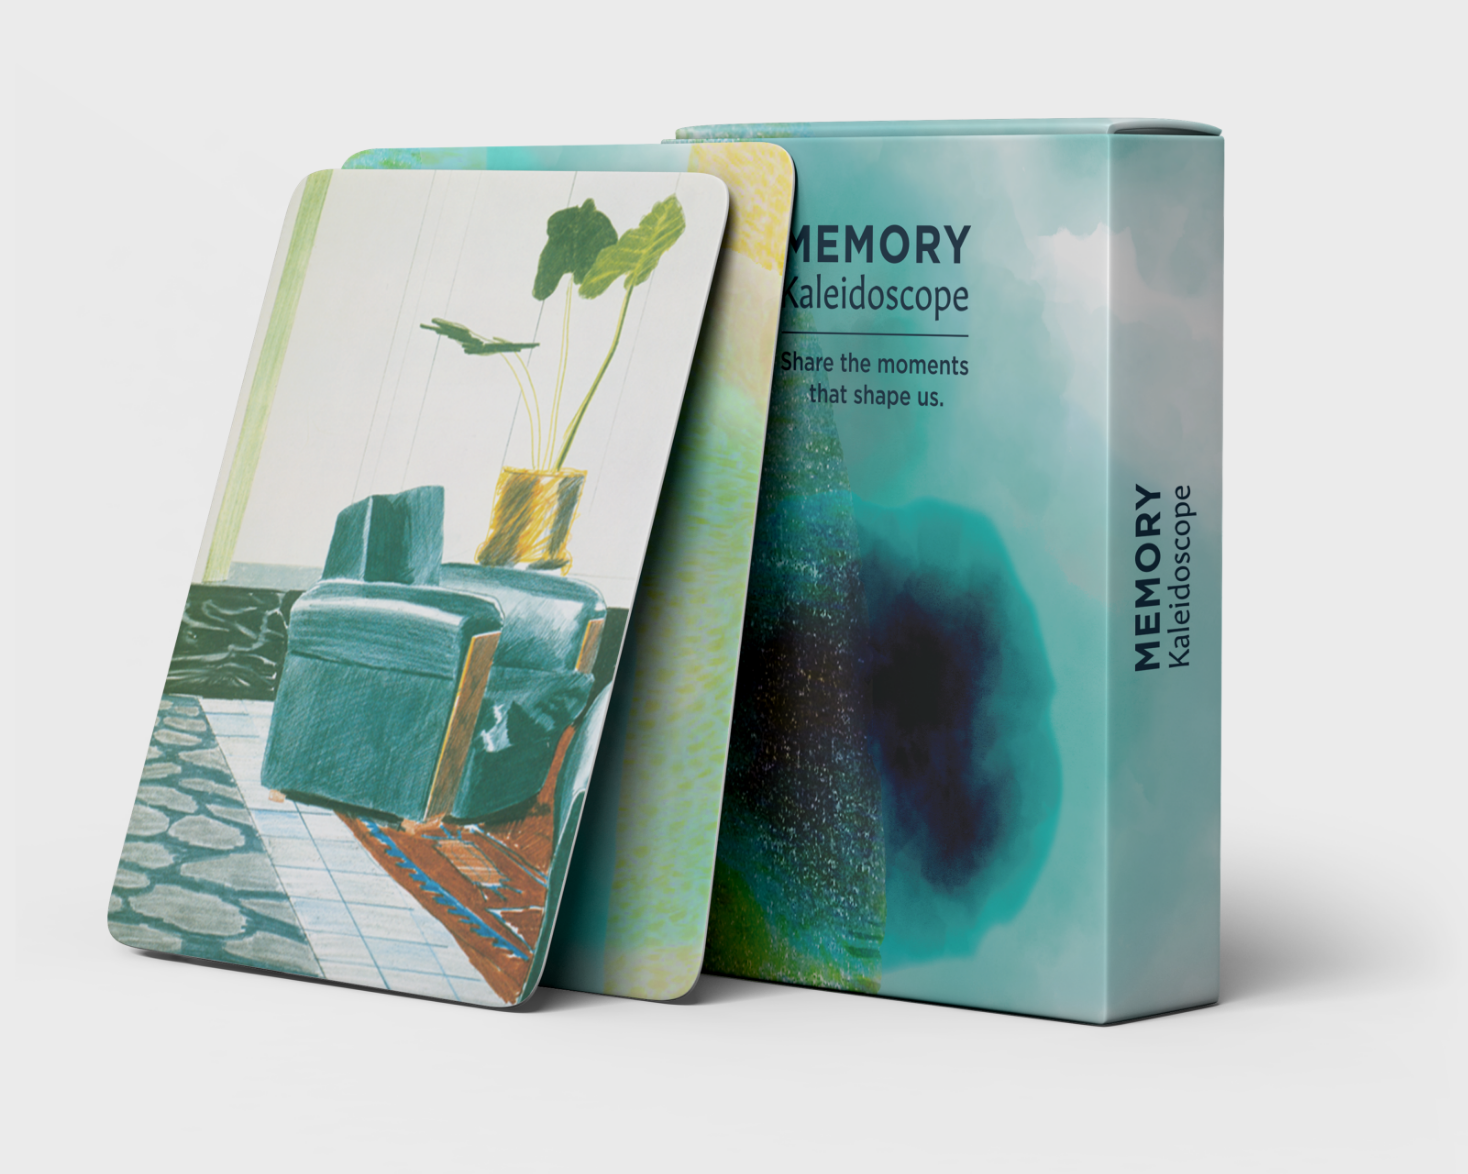 Memory Kaleidoscope, a card game by design dream lab and Talia Souki